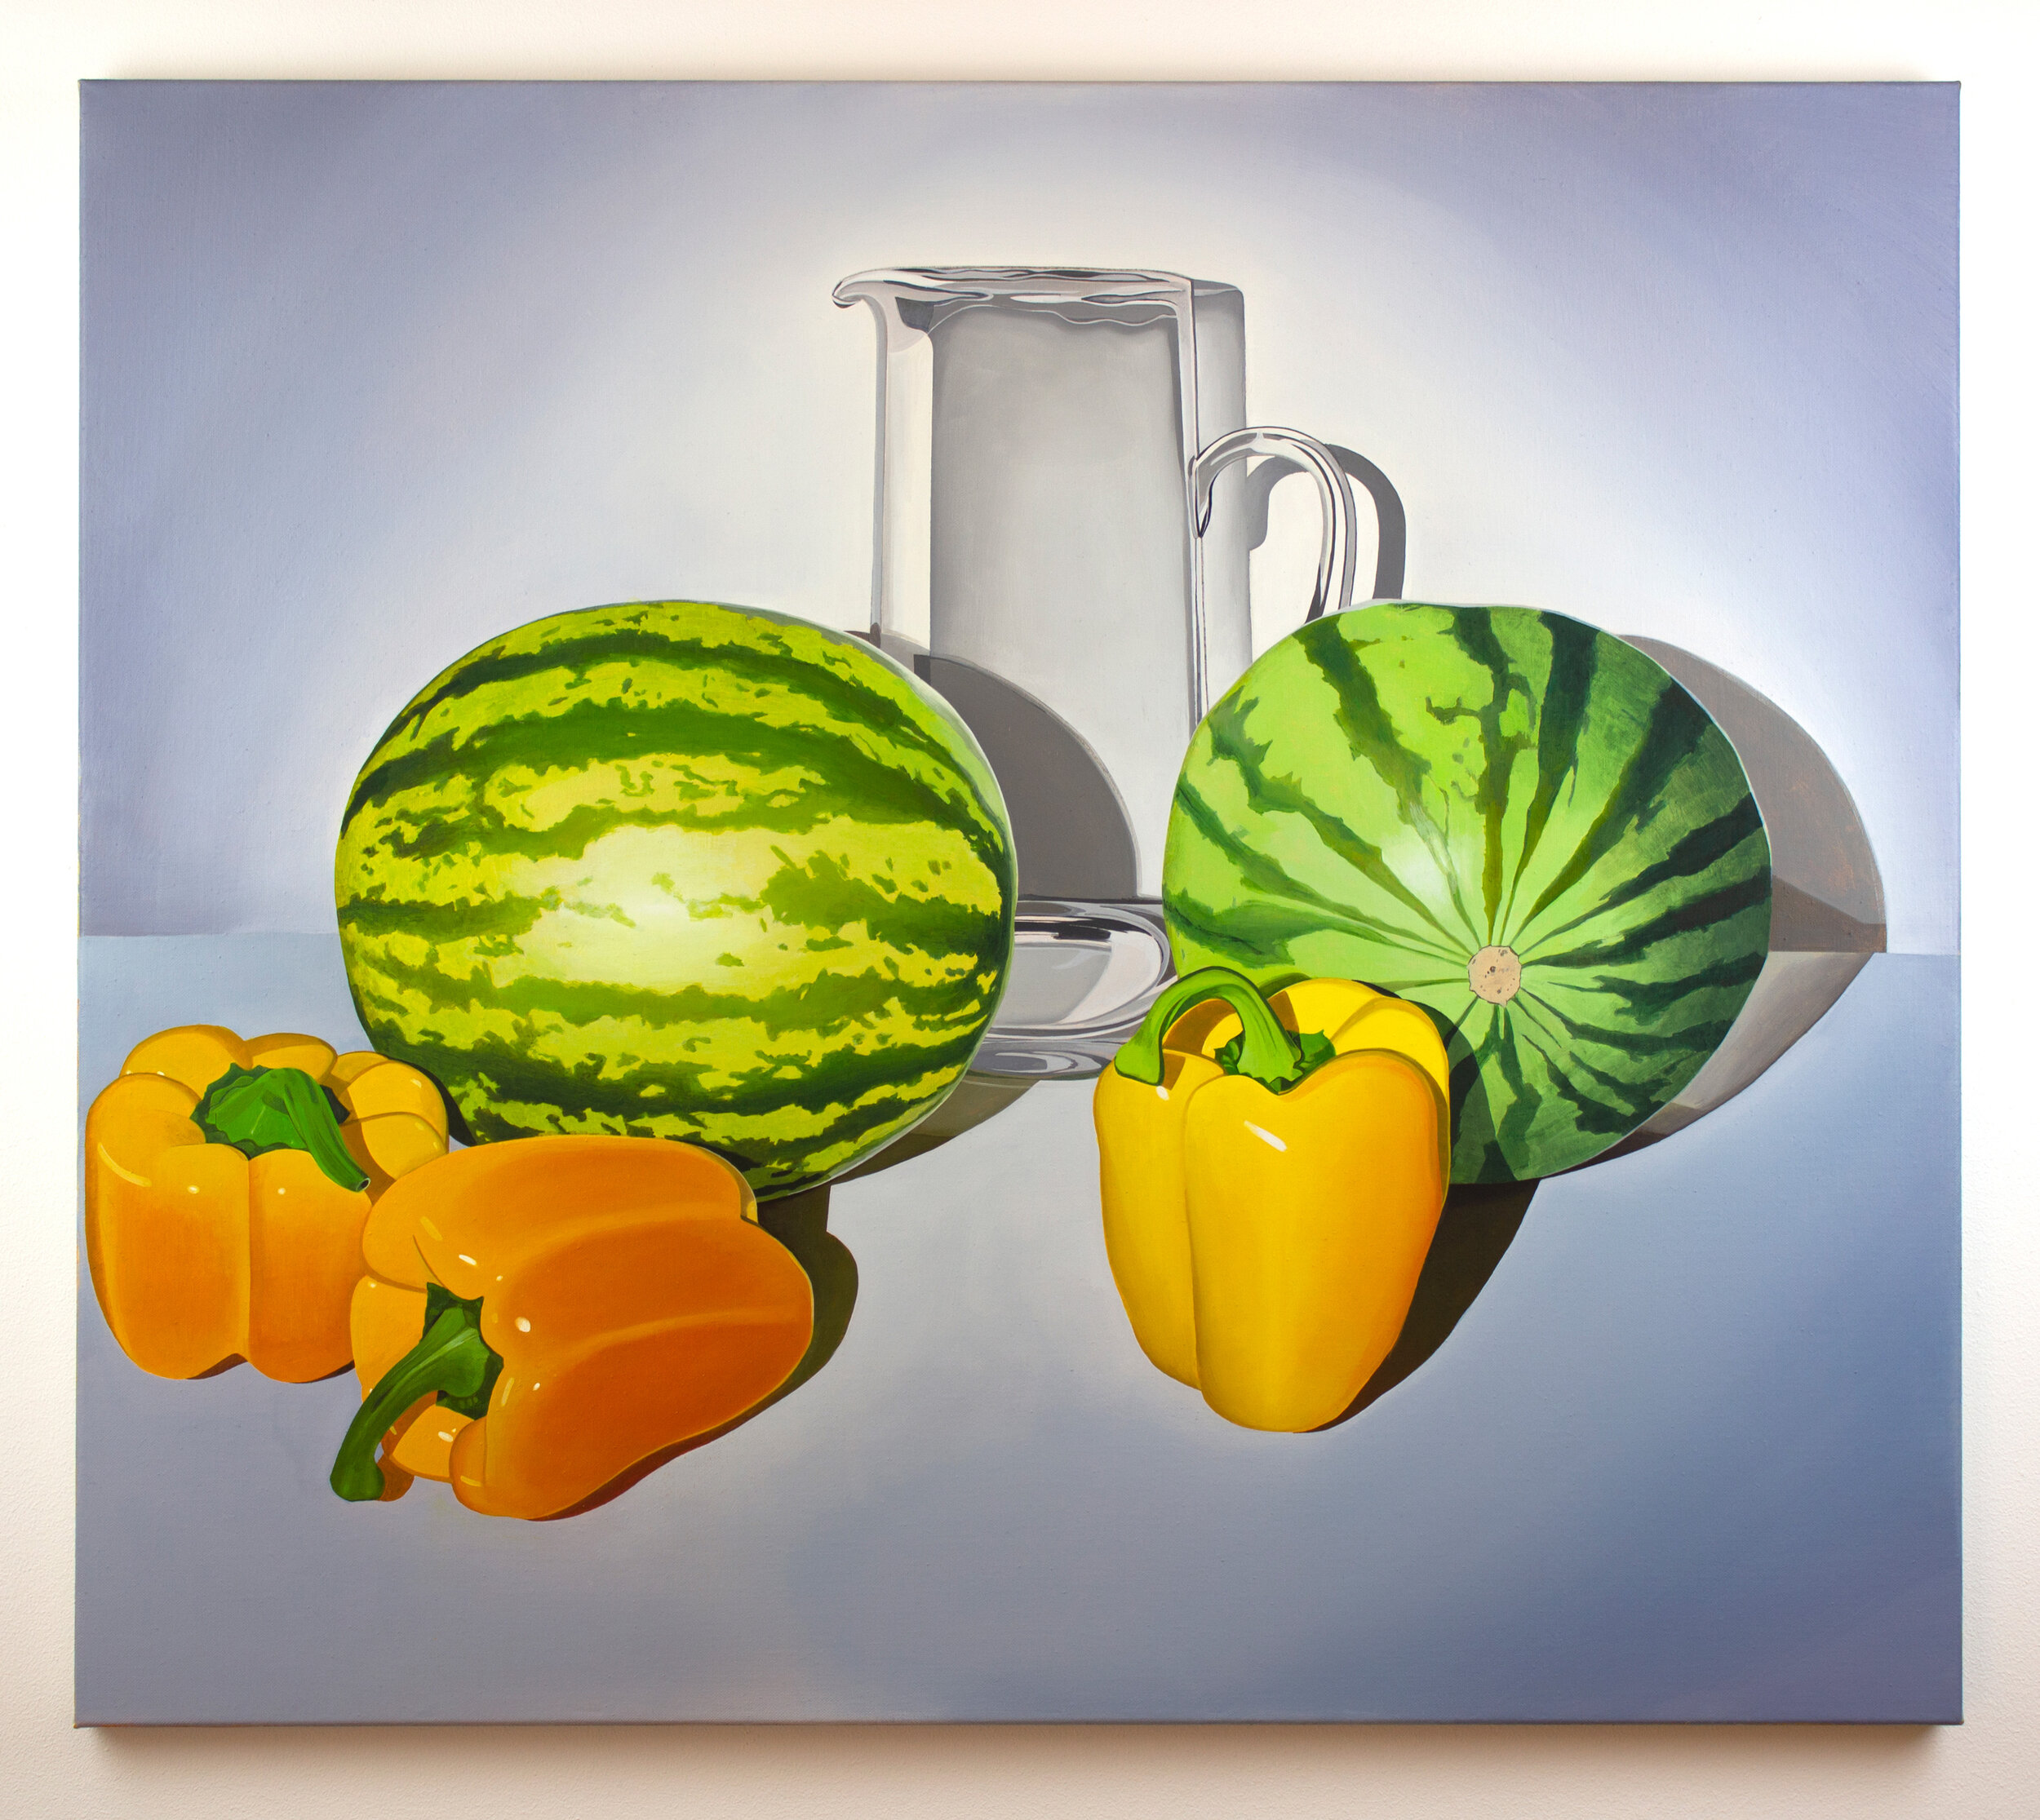  Still Life 2020 (2020)   Oil on linen    70 x 80cm   Private Collection 